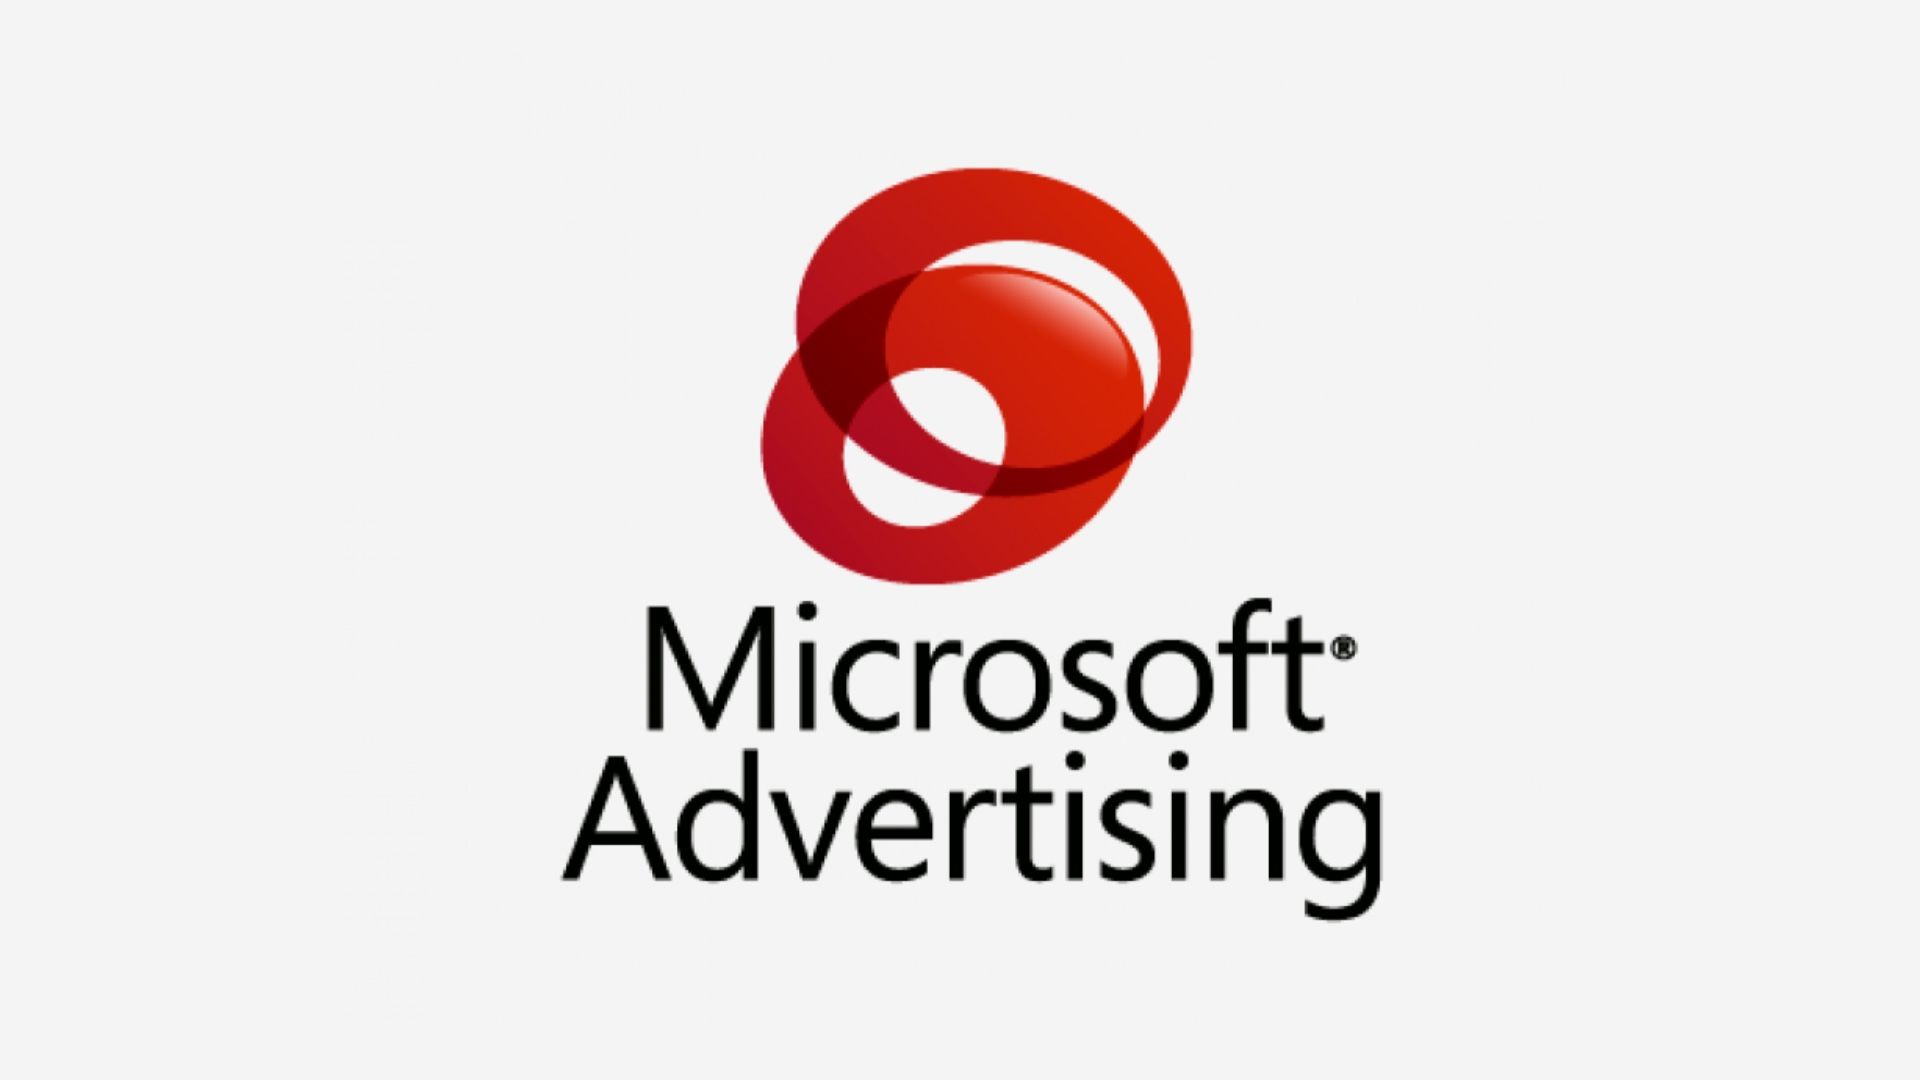 Microsoft Advertising activates brand safety protections in Canada and in the UK